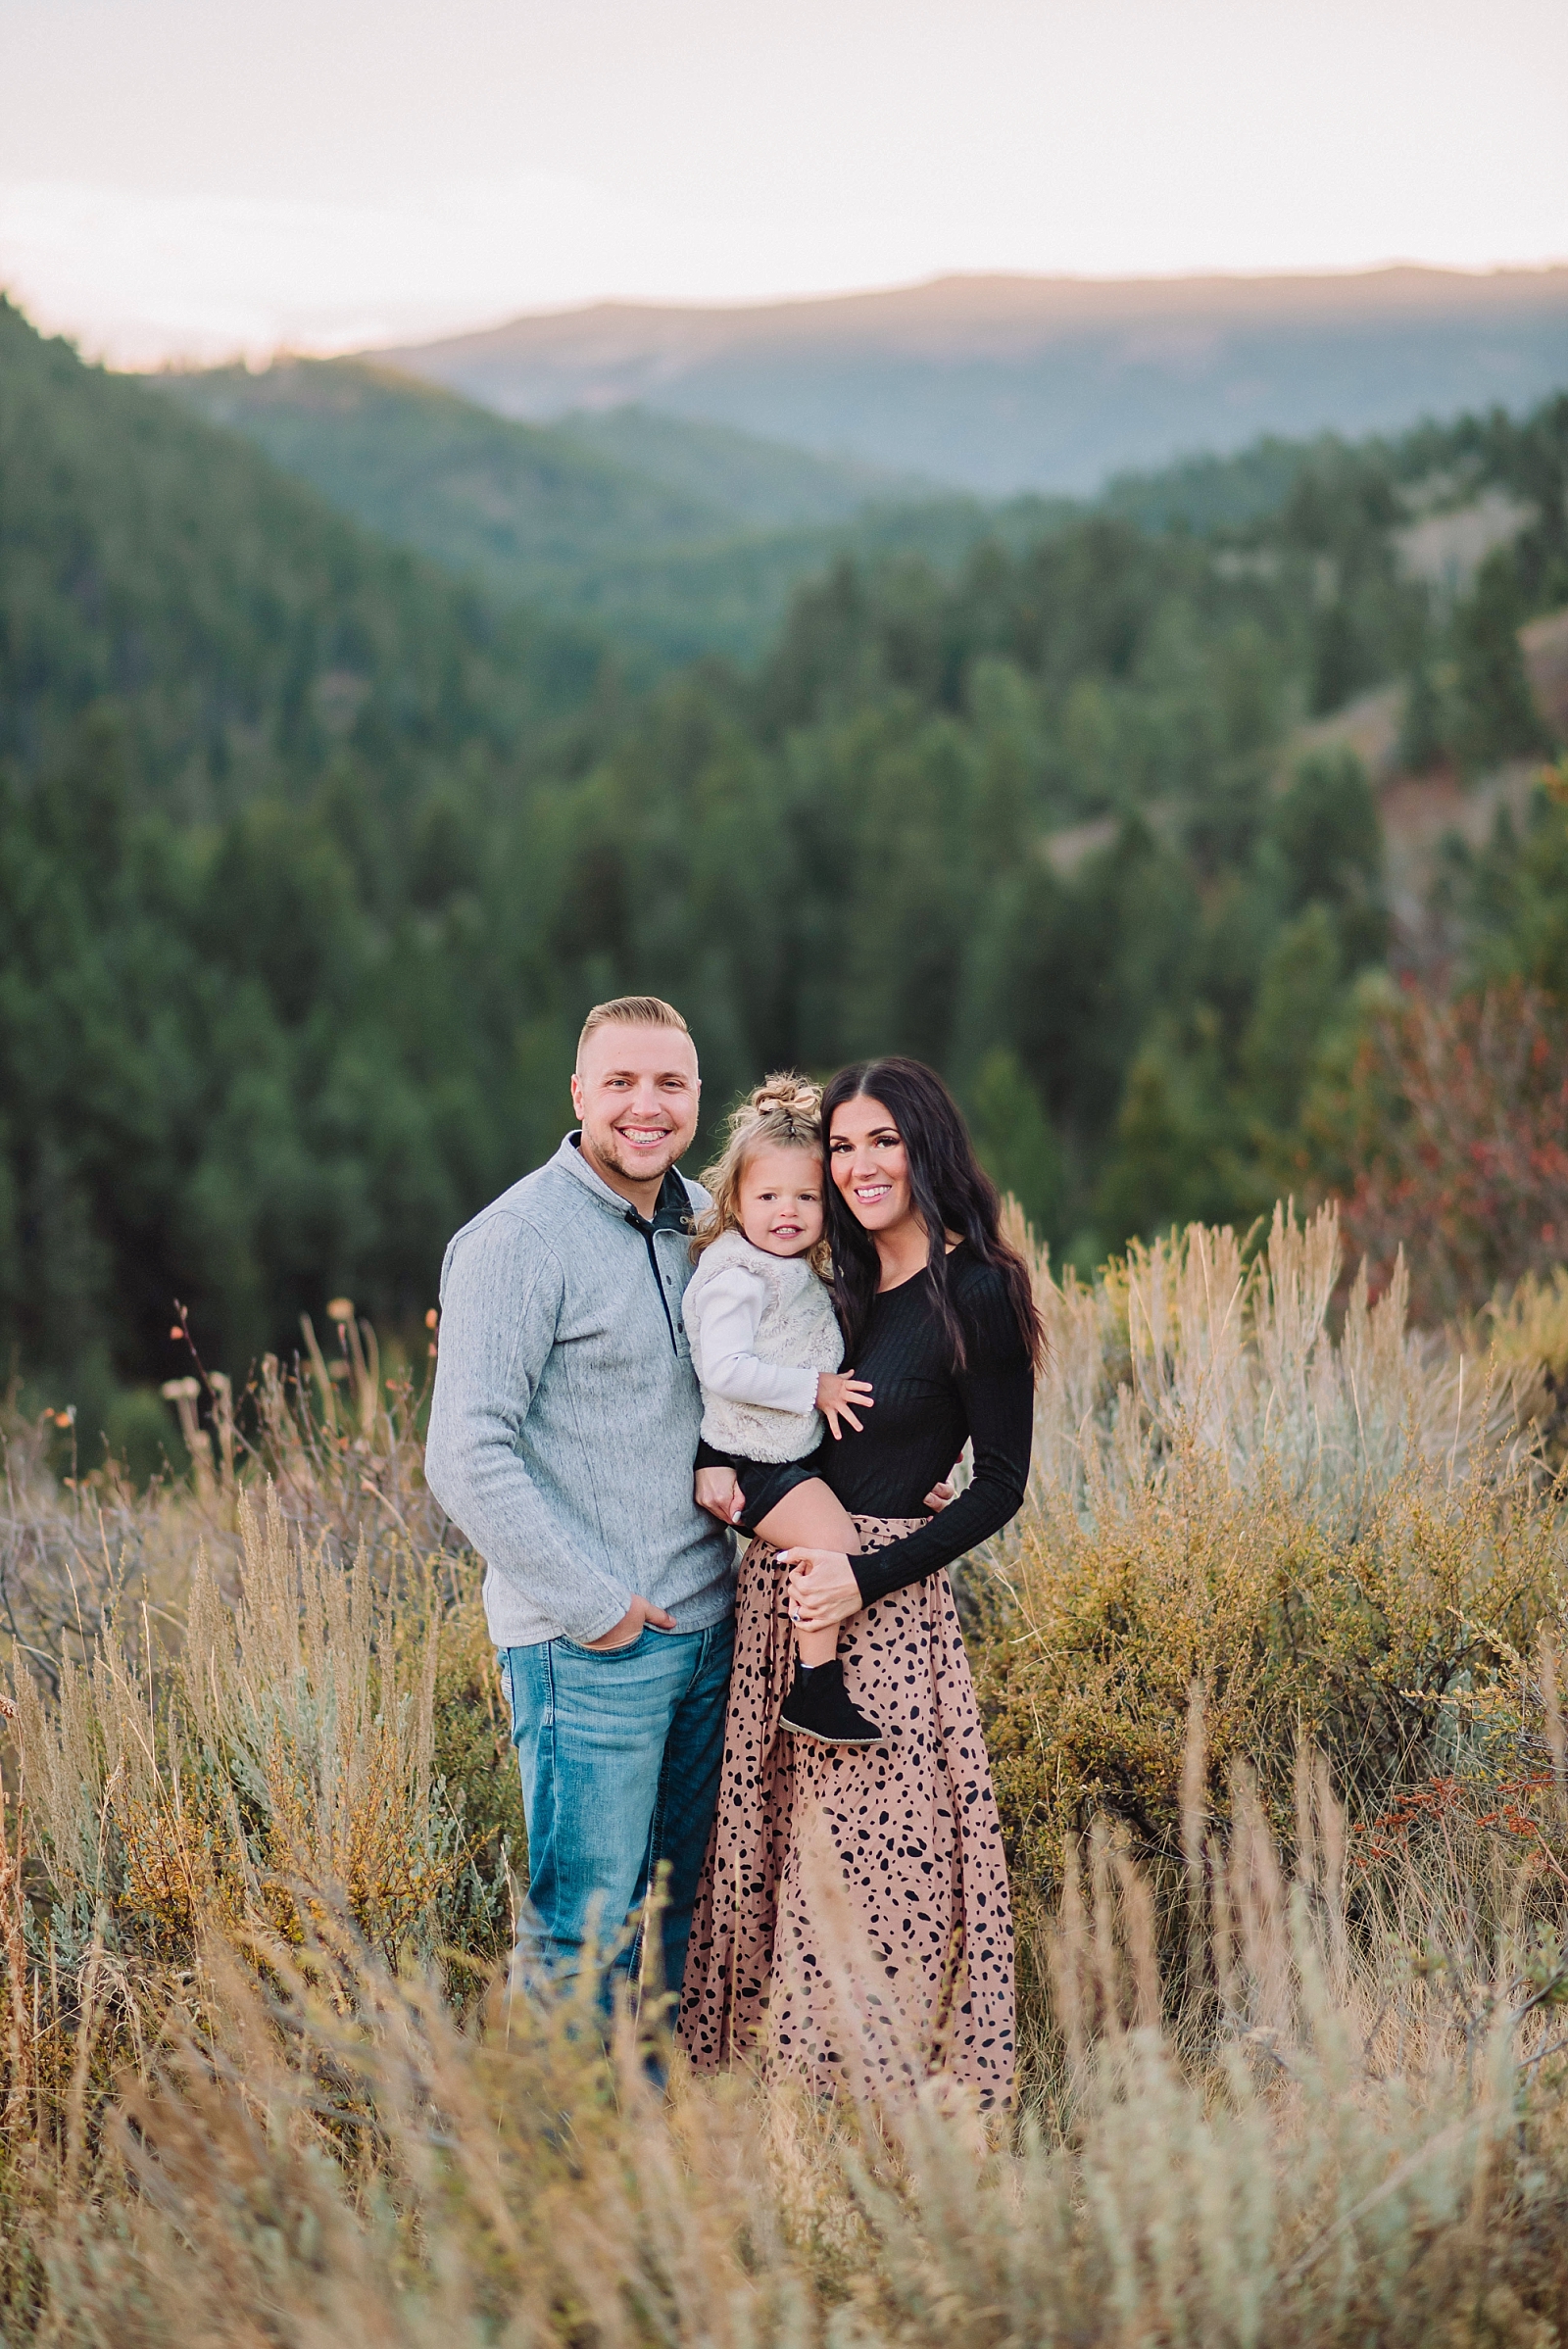 Fall family photos in the mountains